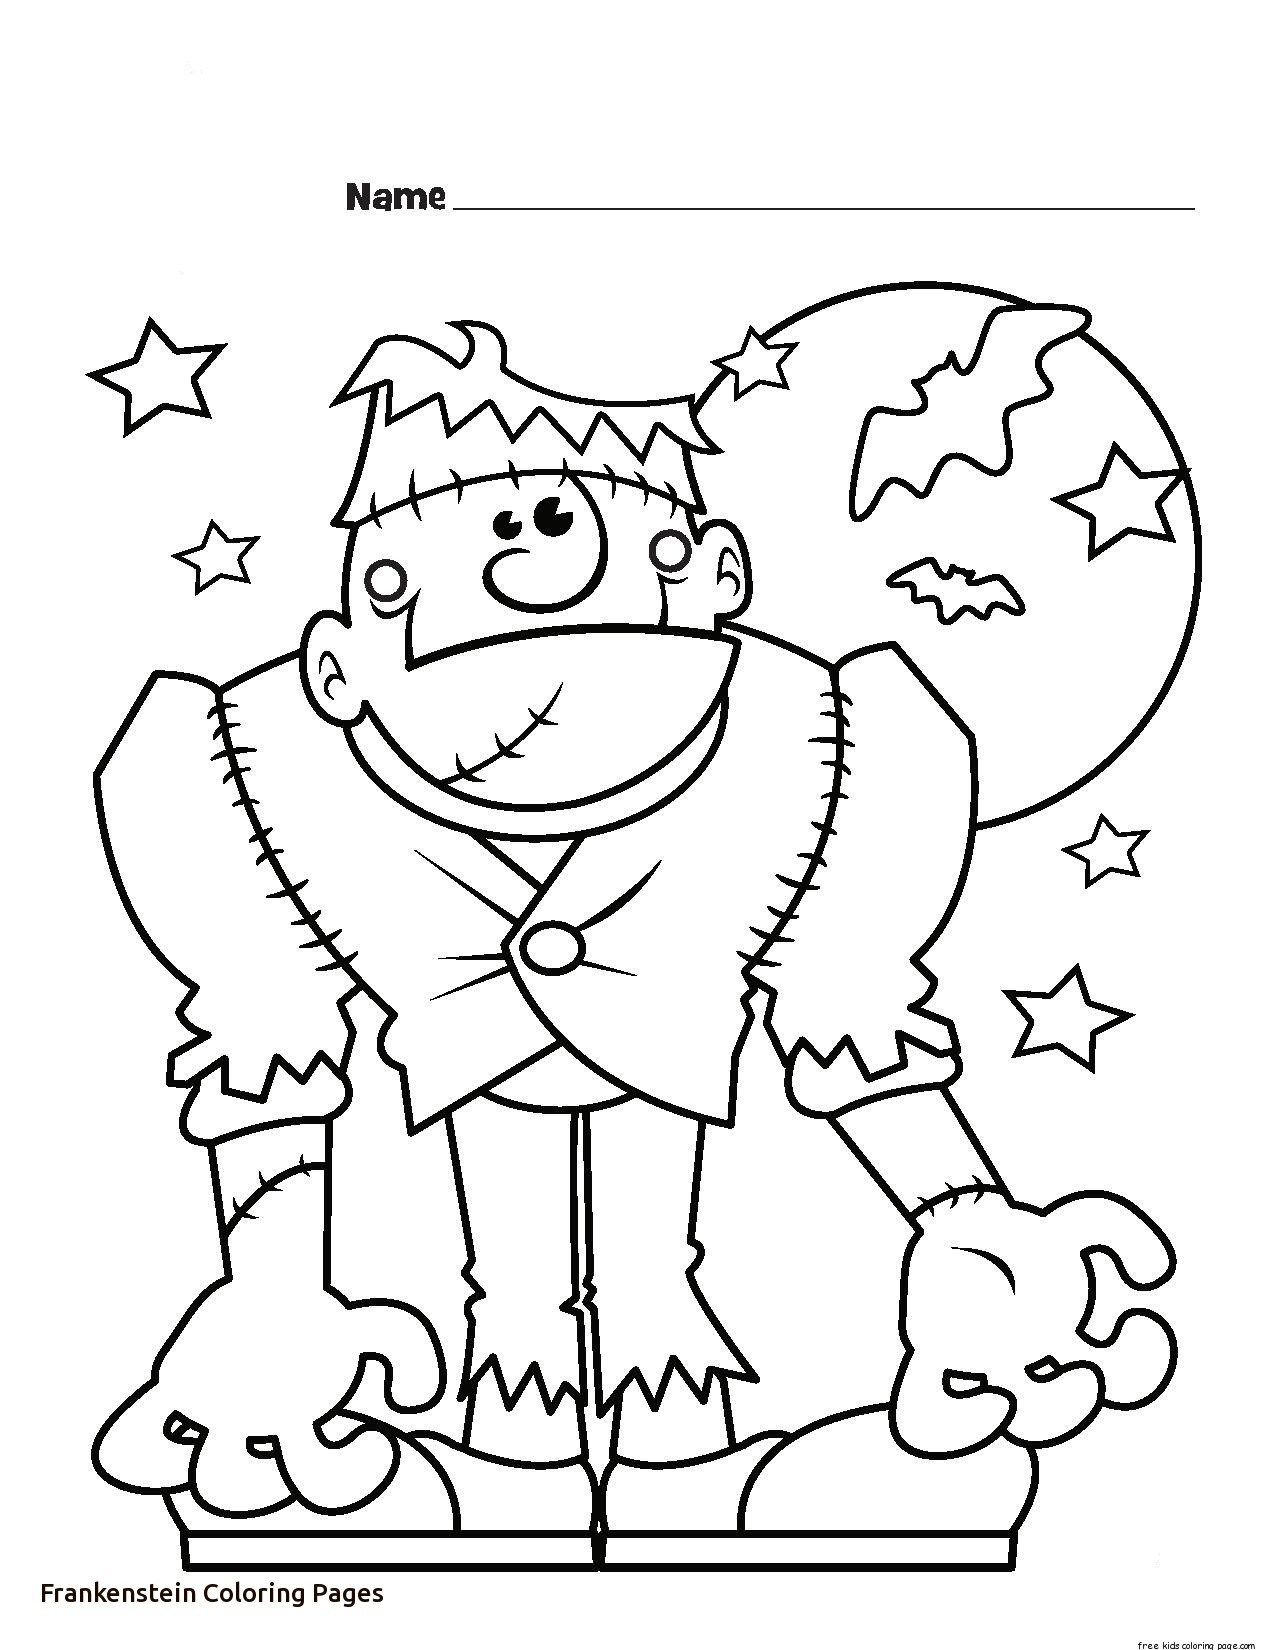 Awesome picture of frankenstein coloring pages